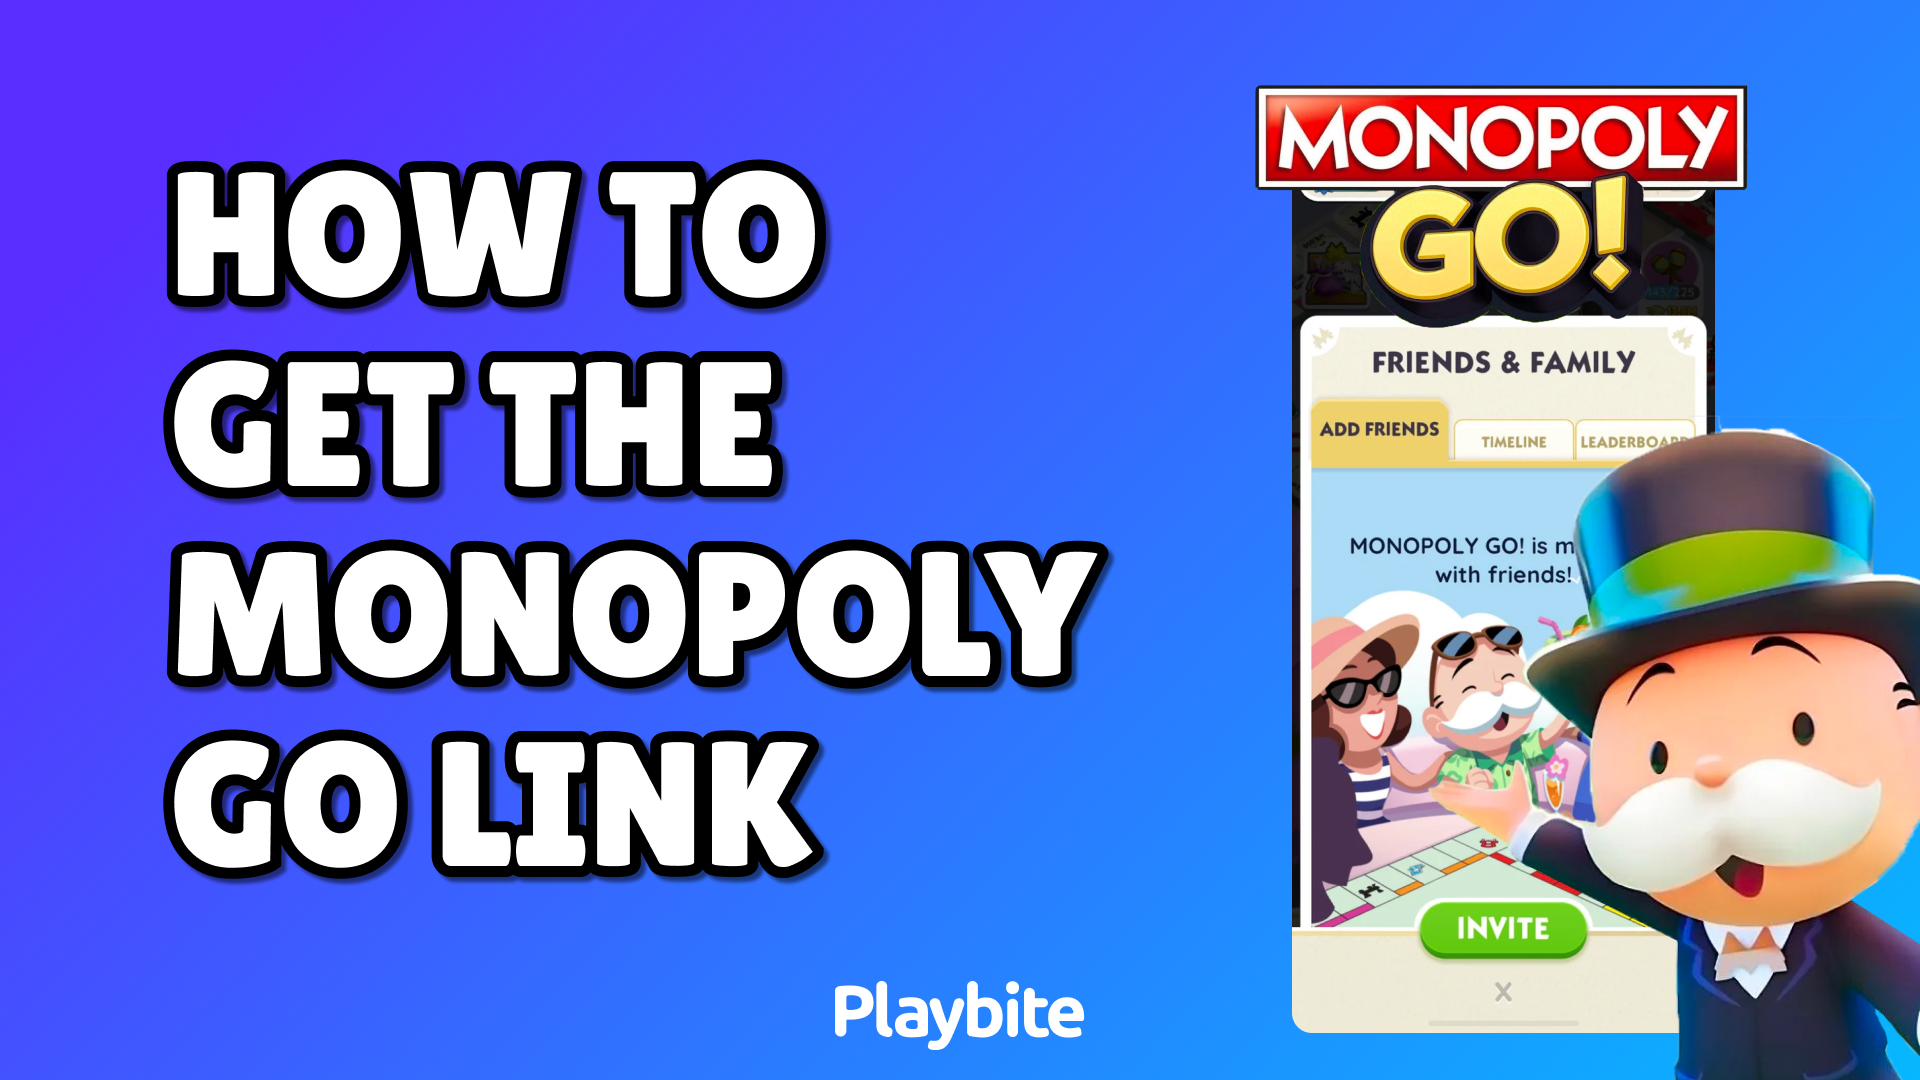 How to Get the Monopoly Go Link